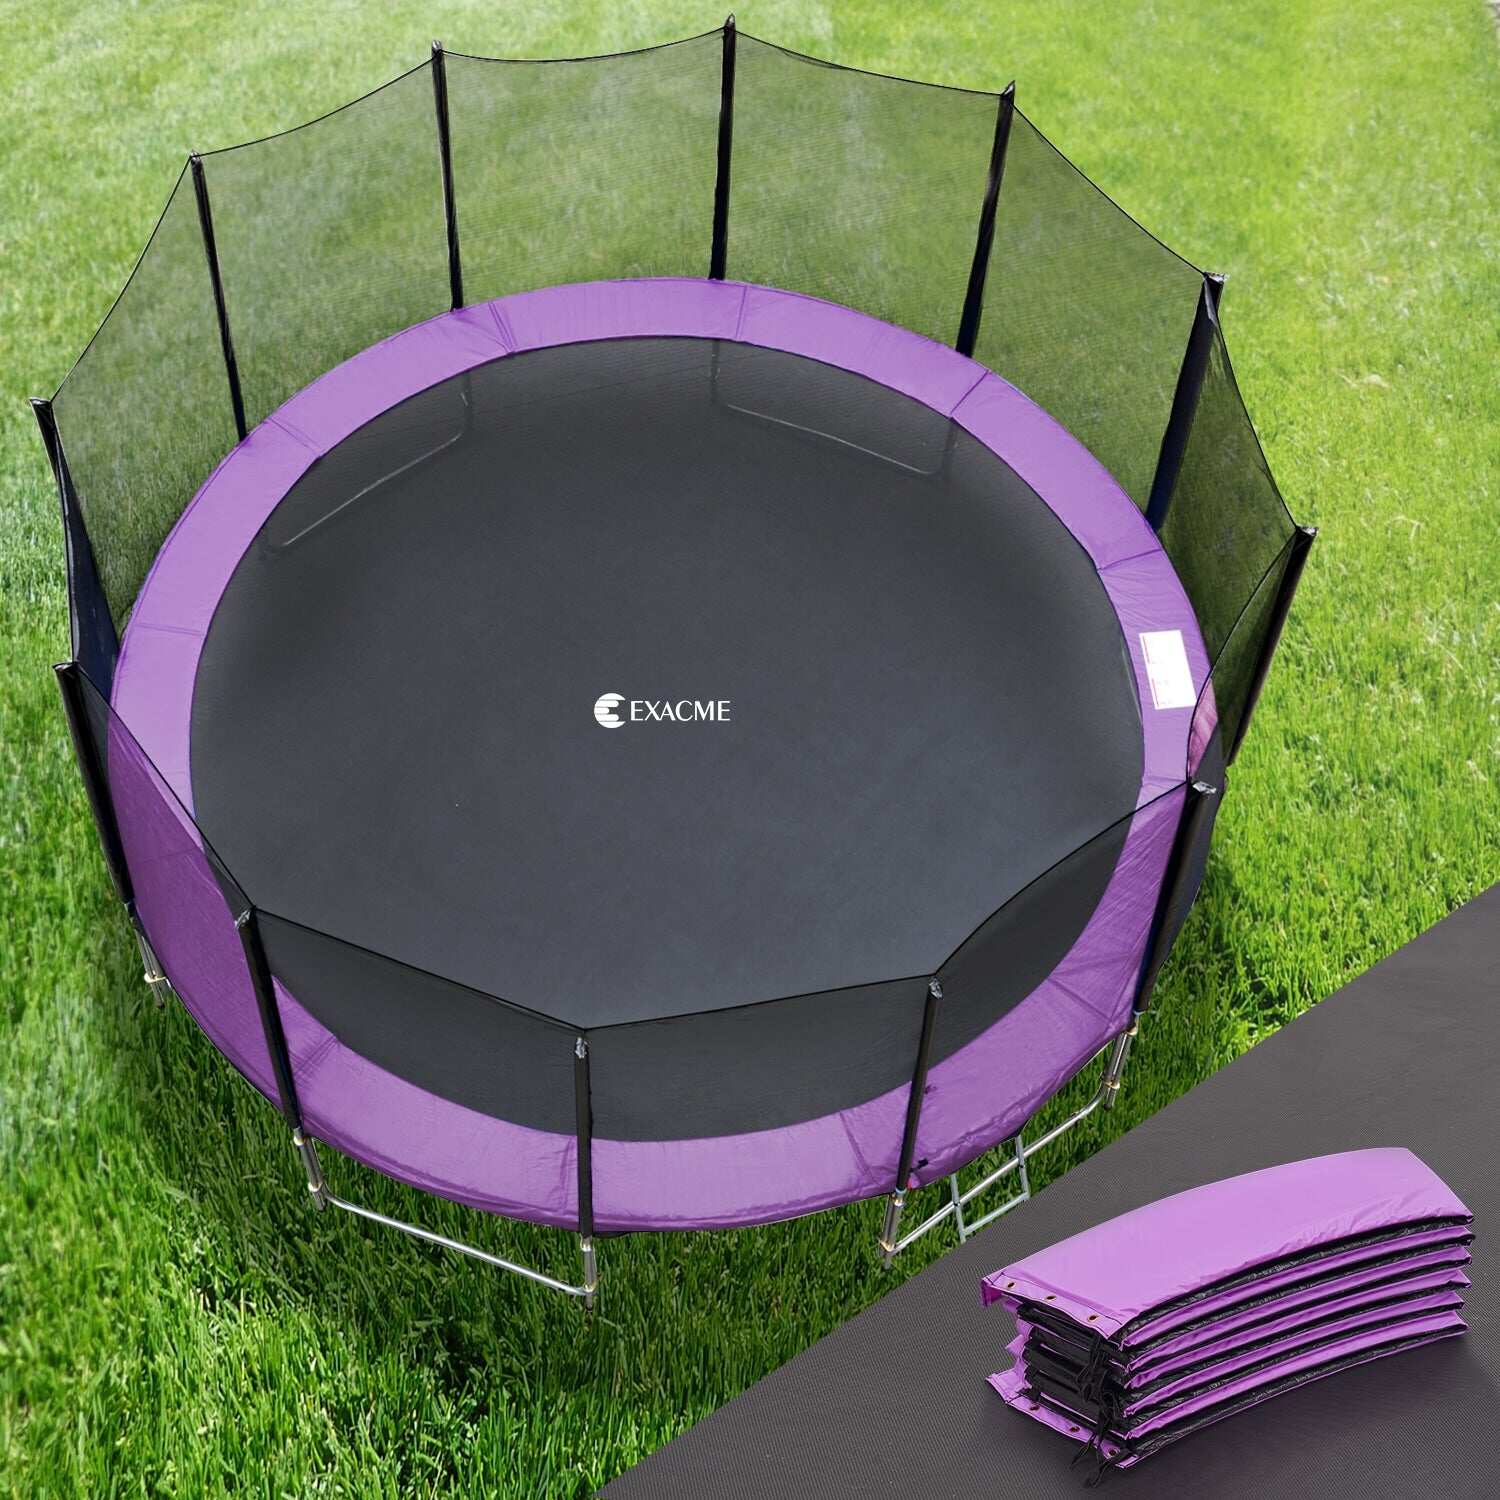 ExacMe Premium Thick Trampoline Pad Replacement with Opening, 12 14 15 Foot Safety Spring Cover with Storage Bag, Purple